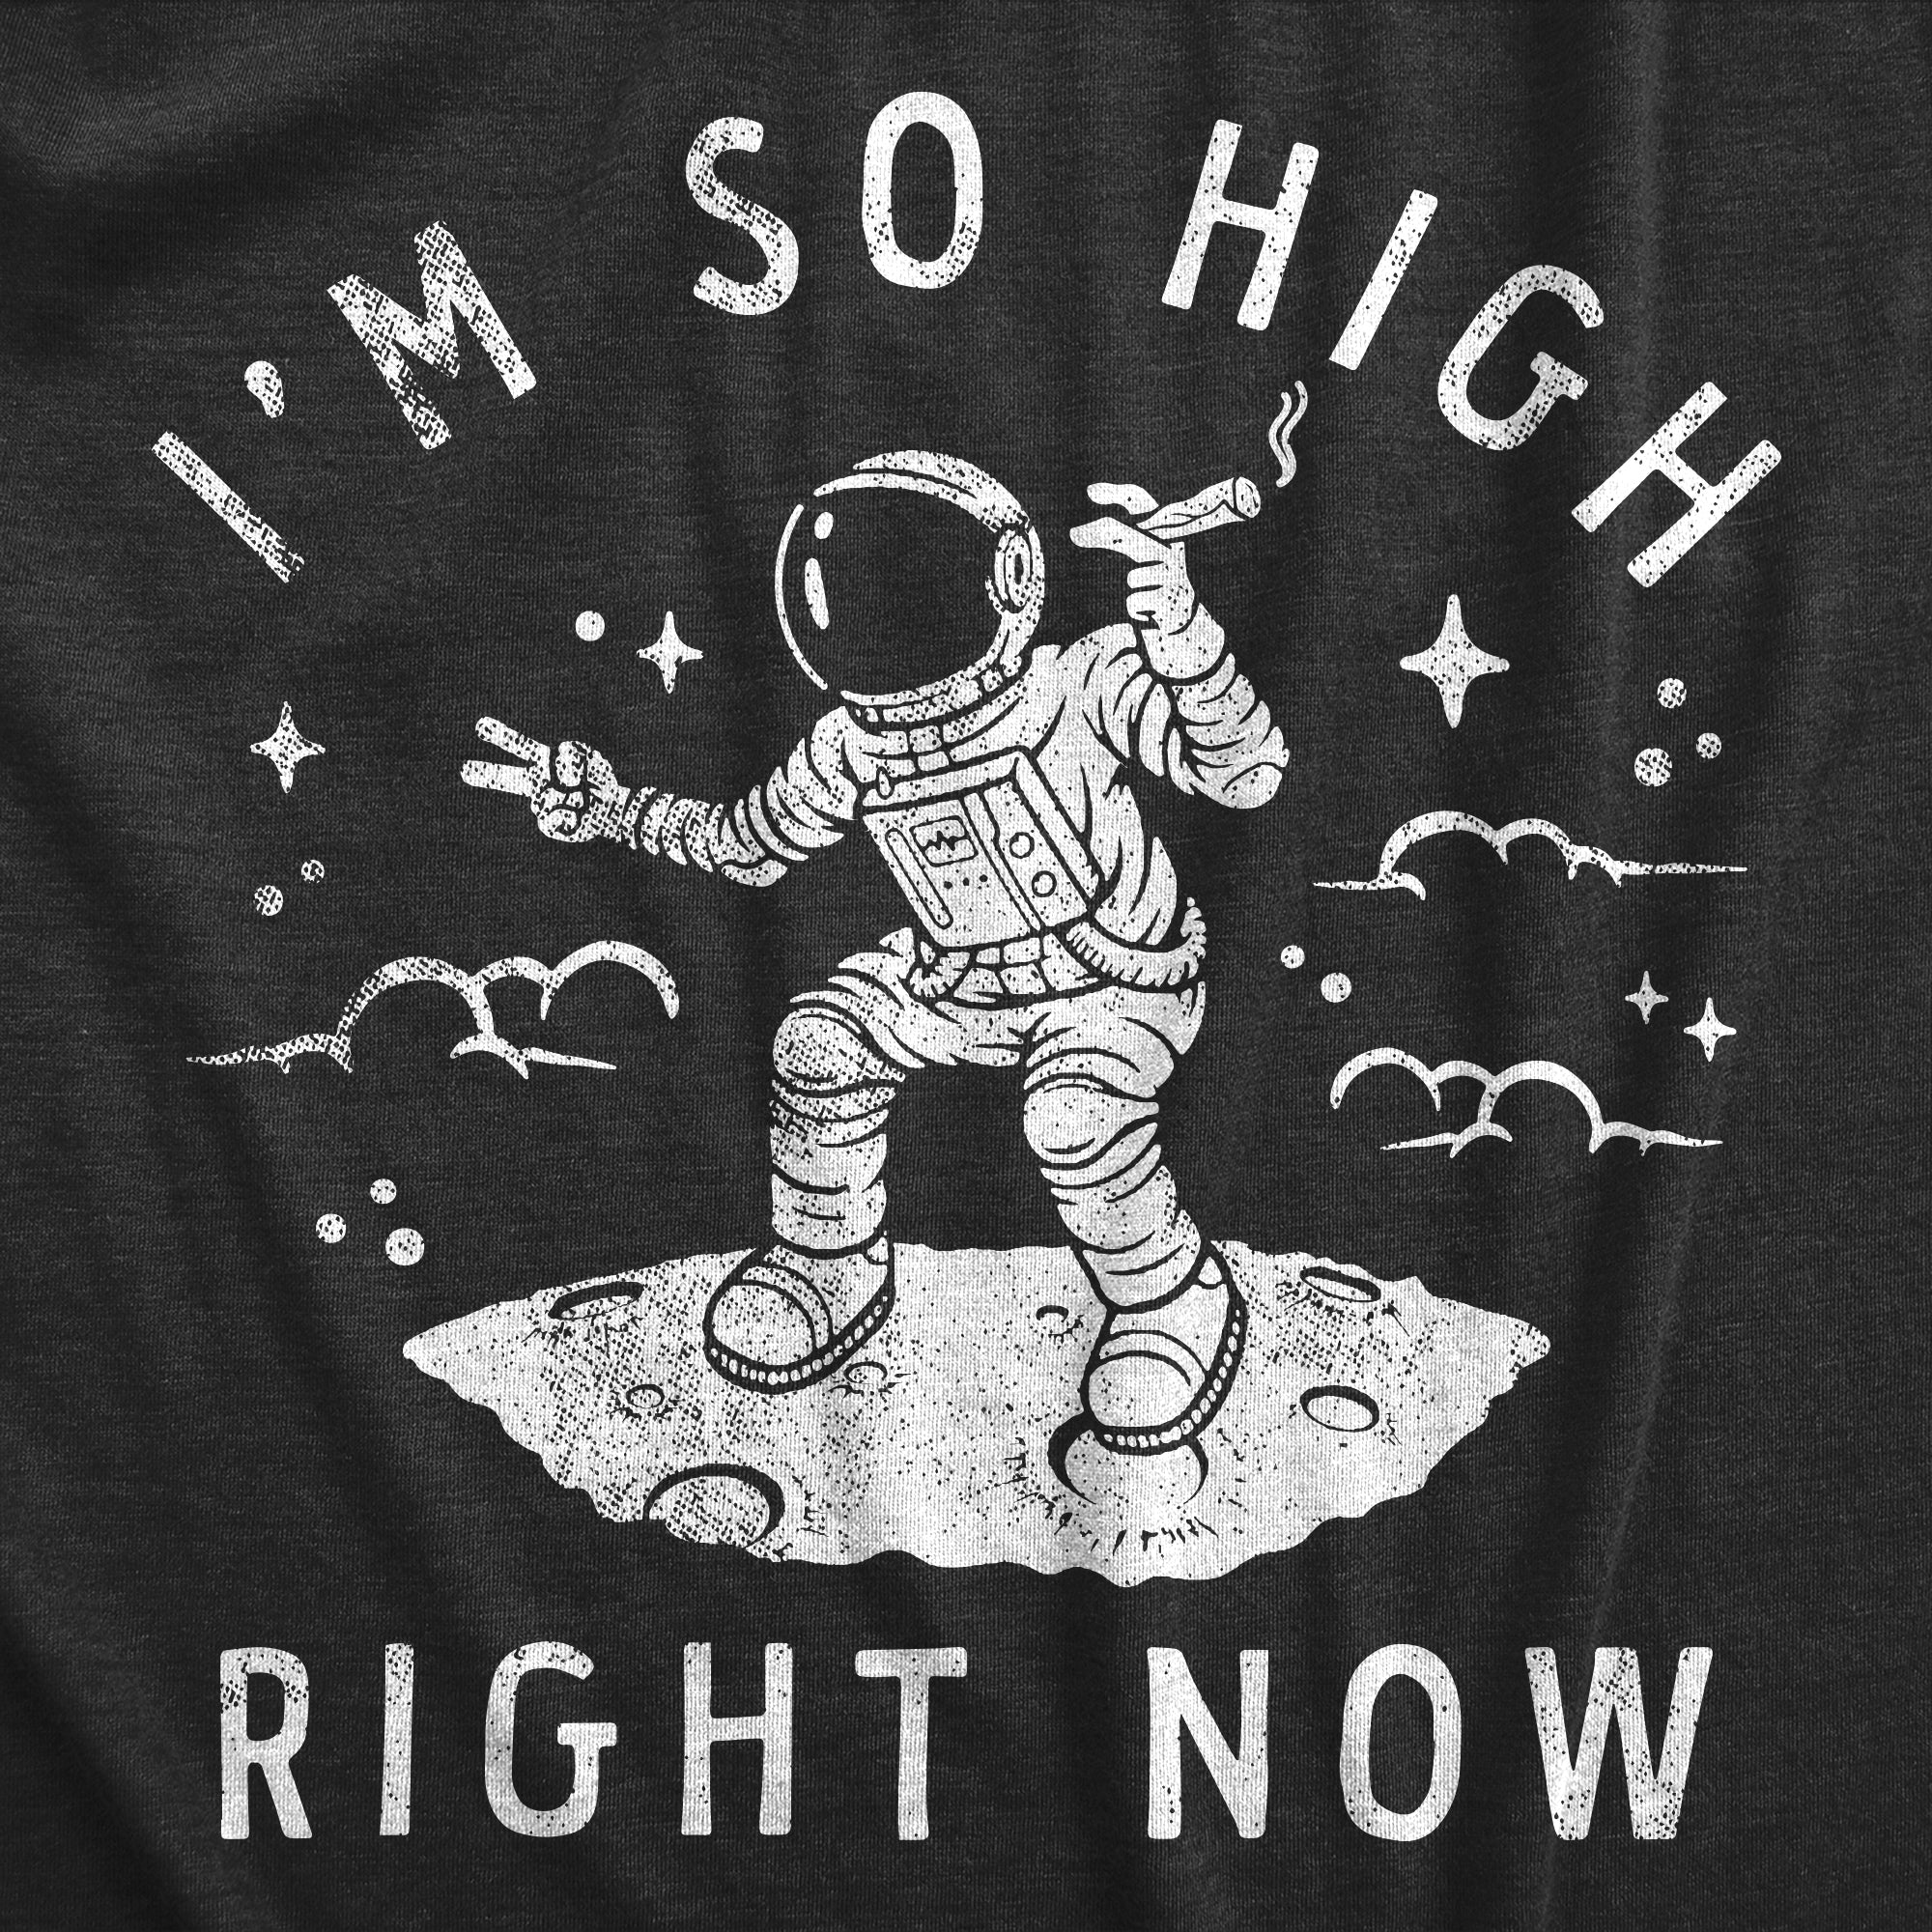 Funny Heather Black - HIGH Im So High Right Now Womens T Shirt Nerdy 420 space Tee